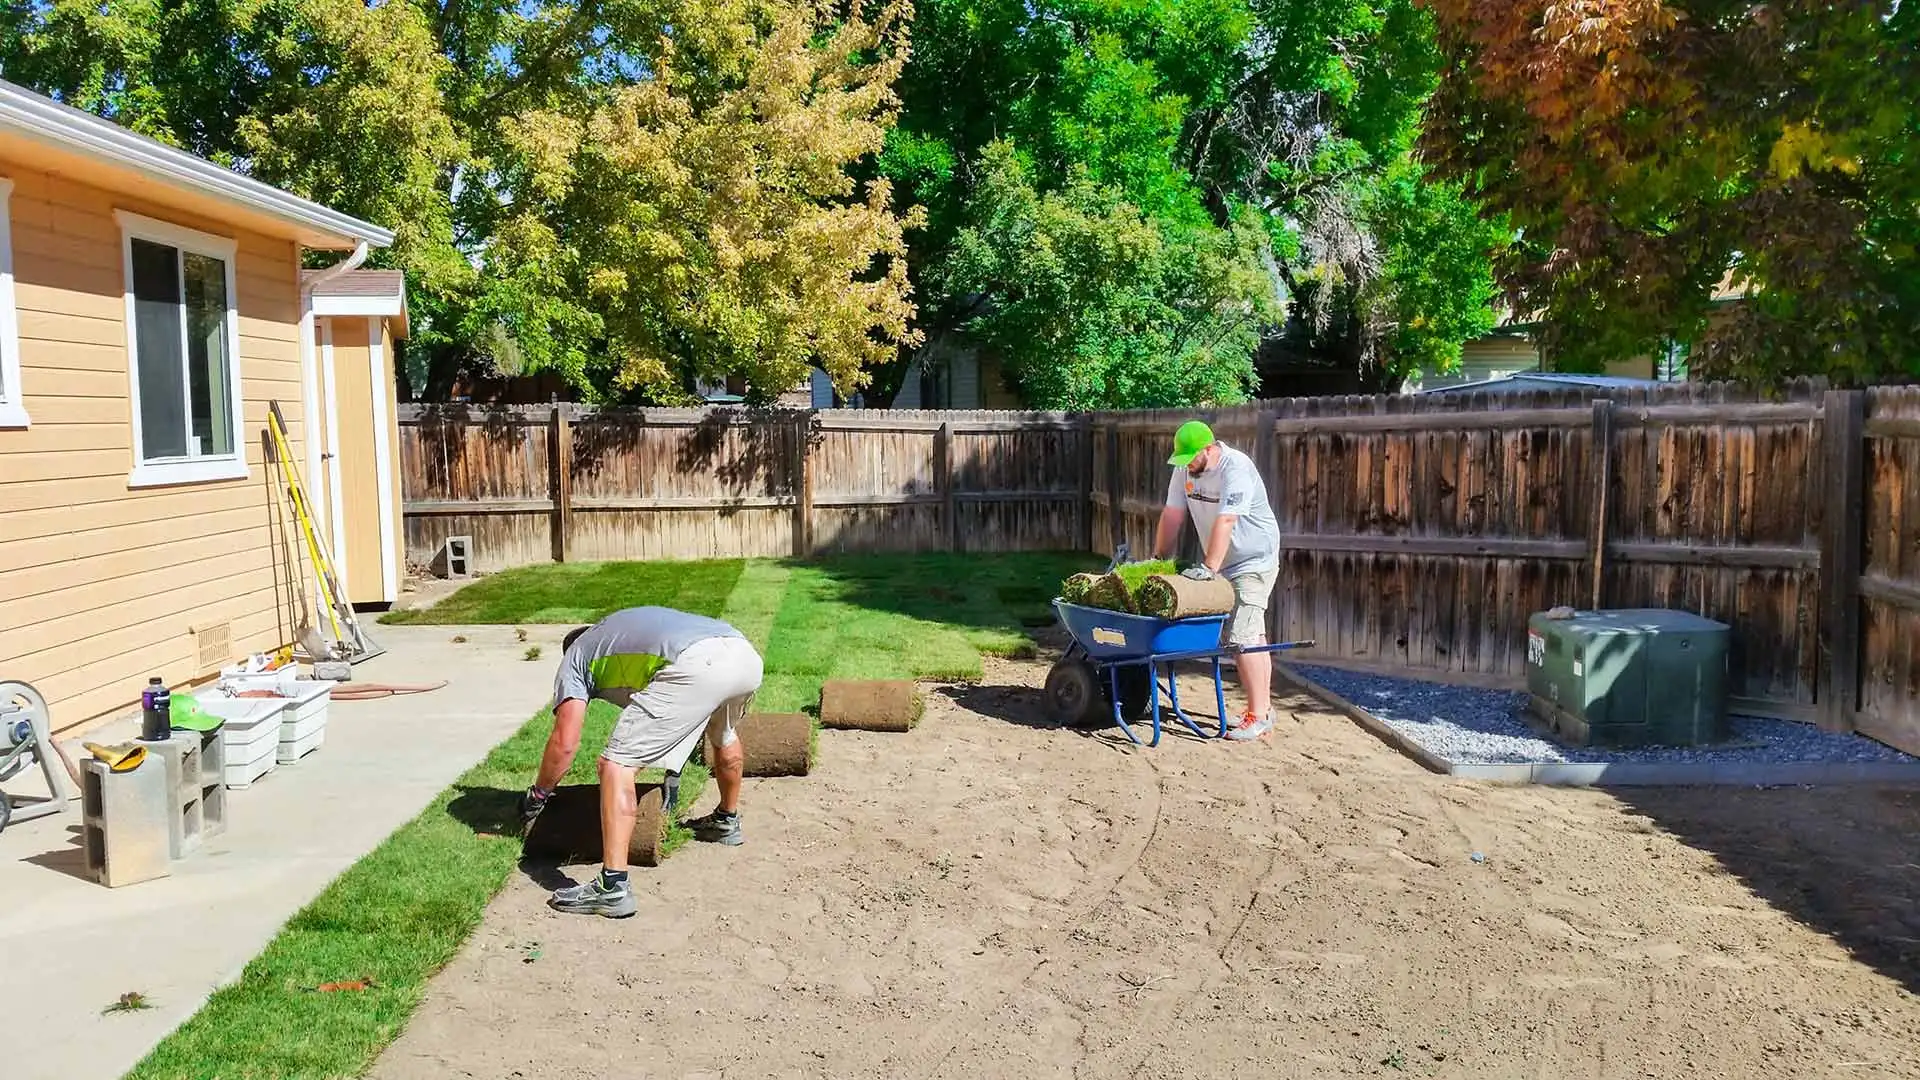 Professionals installing new sod during a lawn renovation project near Fruita, CO.